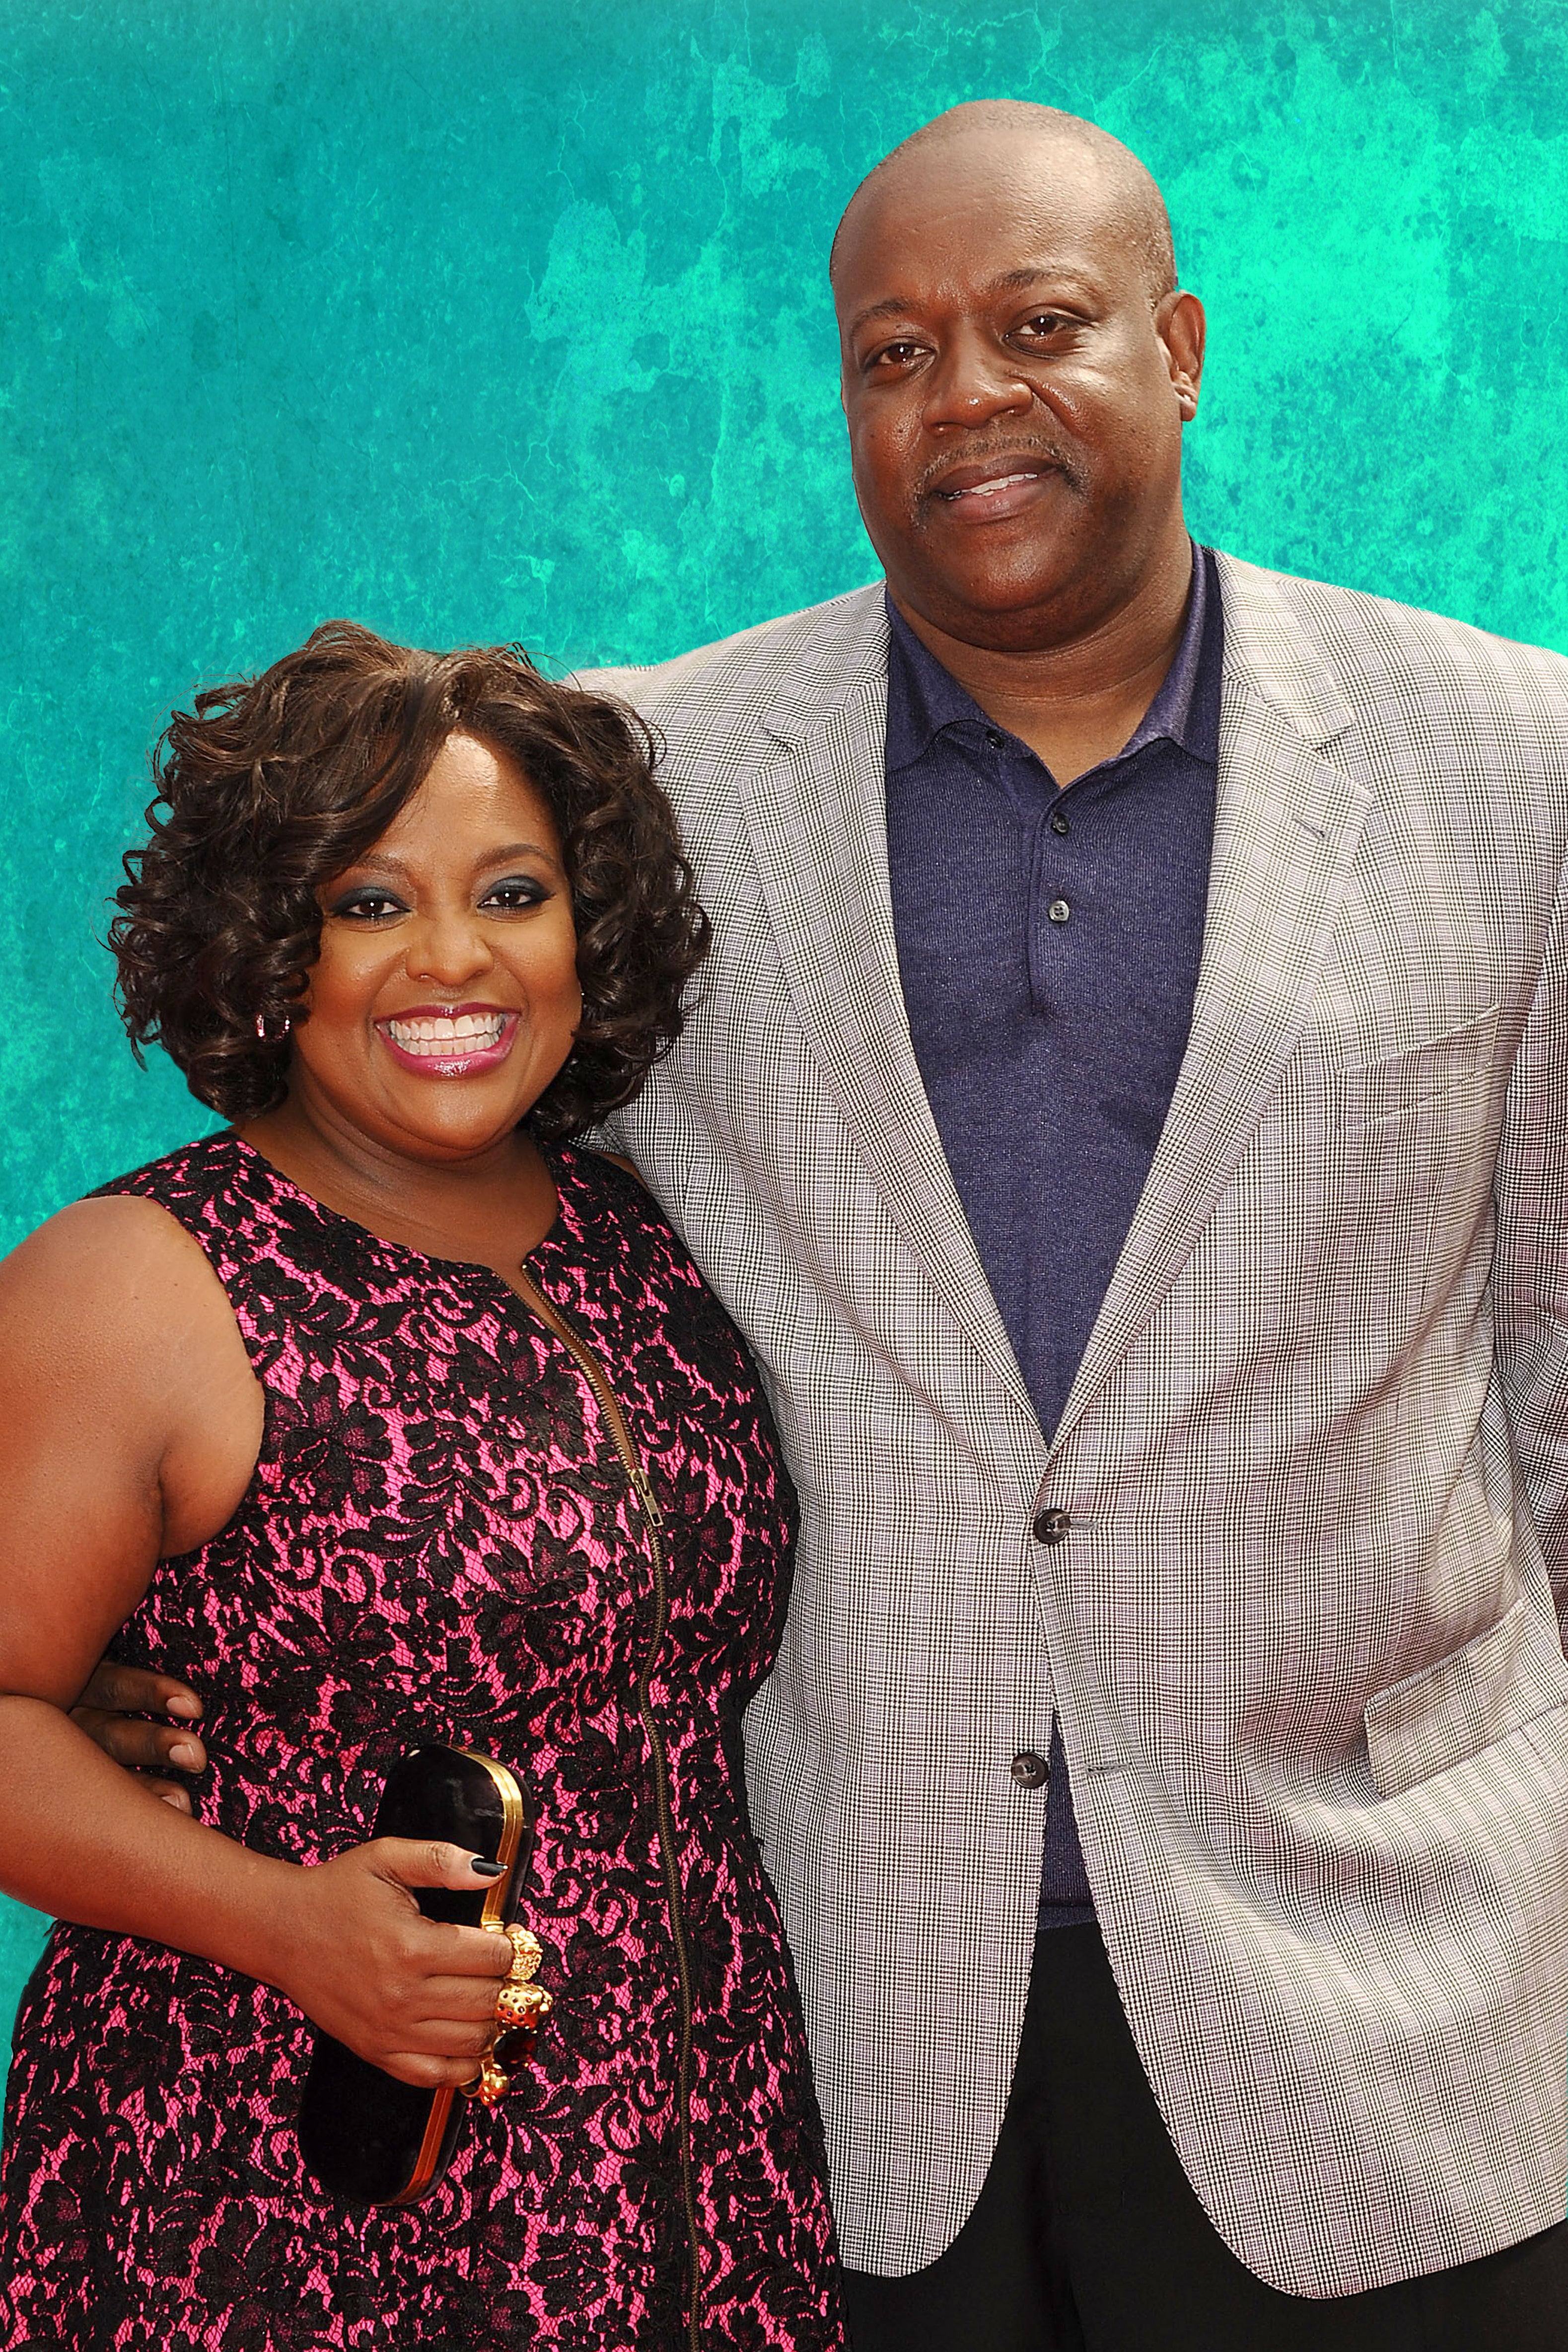 Sherri Shepherd Spots Ex-Husband Claiming to Be ‘Well-Off’ In Dating Profile And Claps Back Perfectly